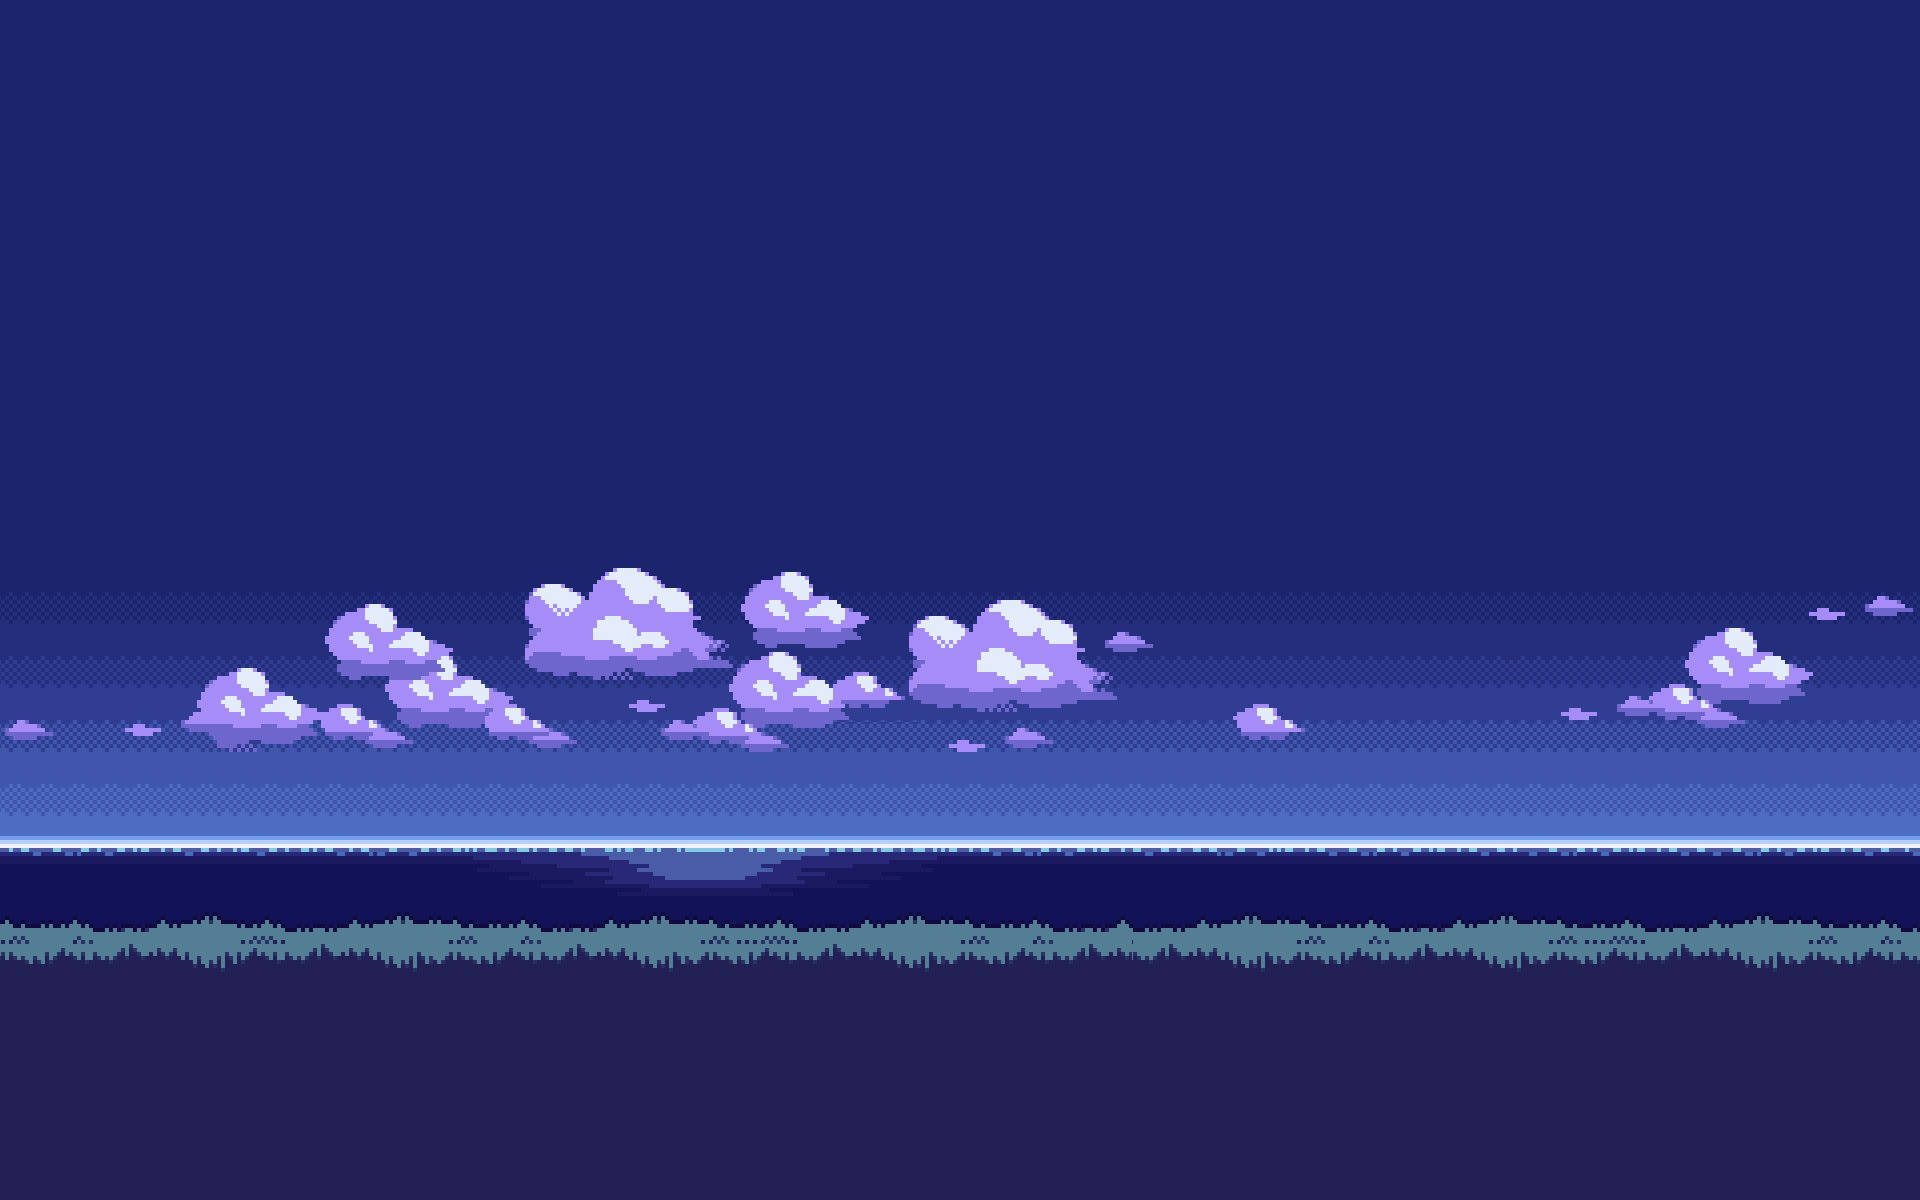 Aesthetic 8 Bit Blue Cloudy Sky Background